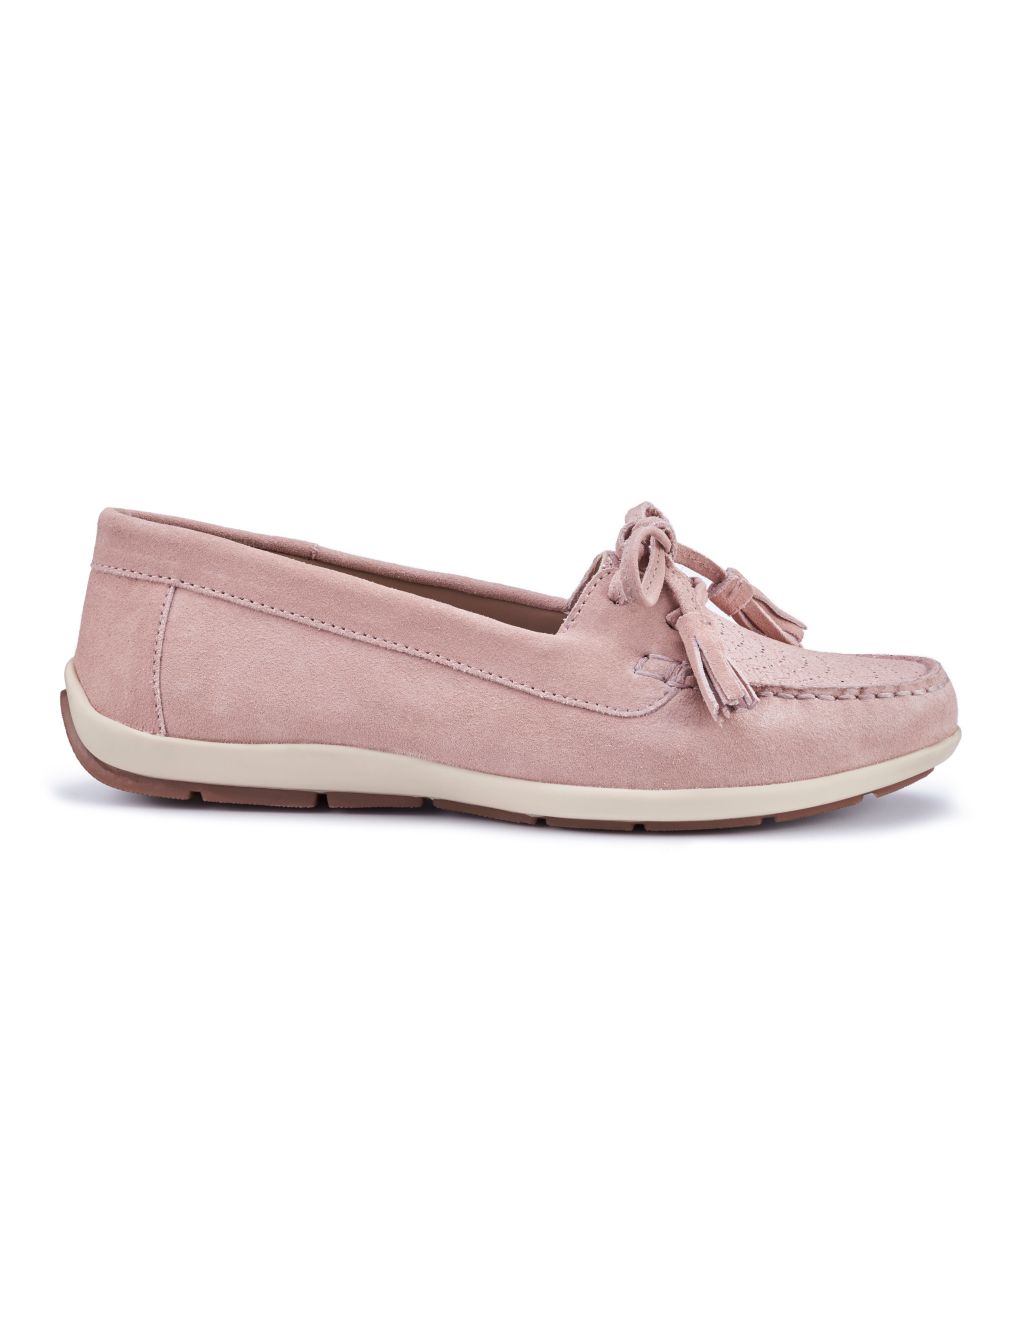 Bay Wide Fit Suede Slip On Flat Loafers